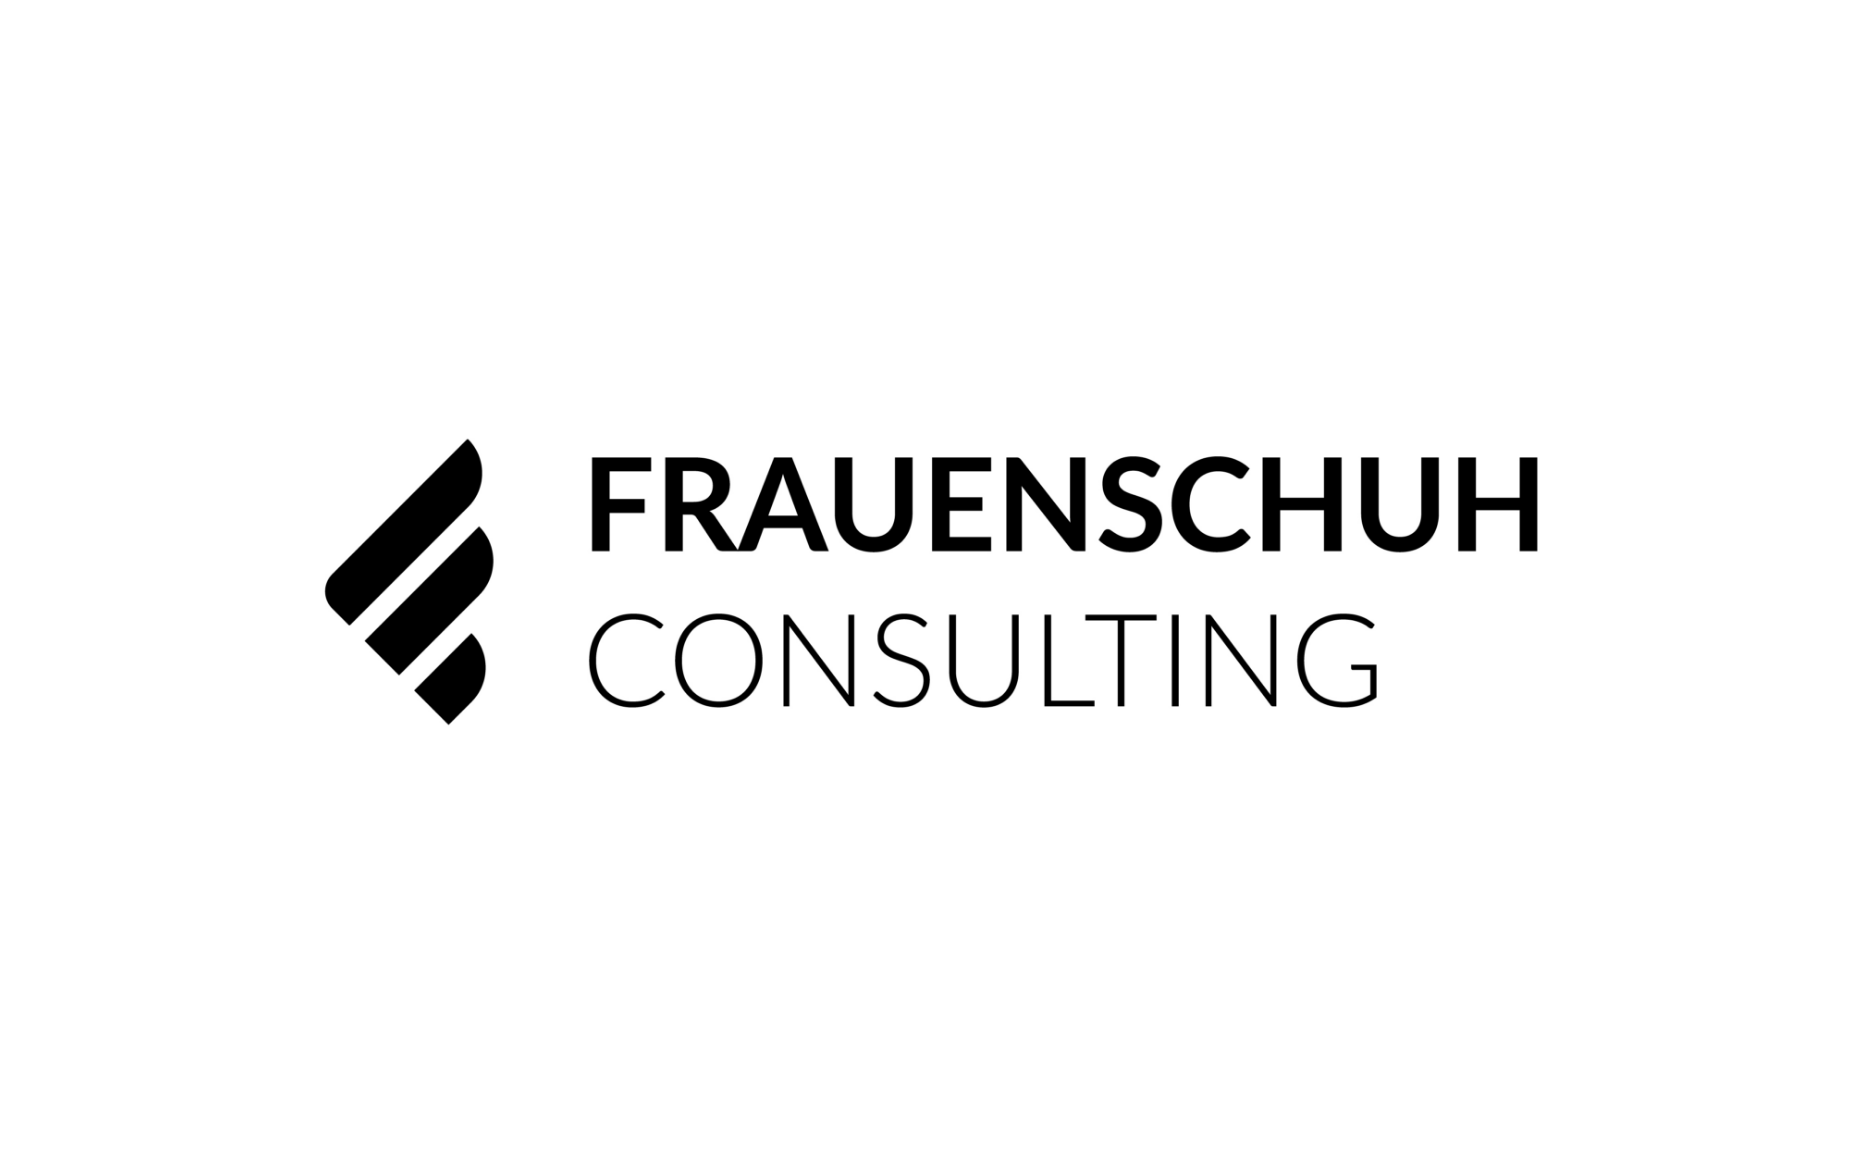 Frauenschuh Consulting